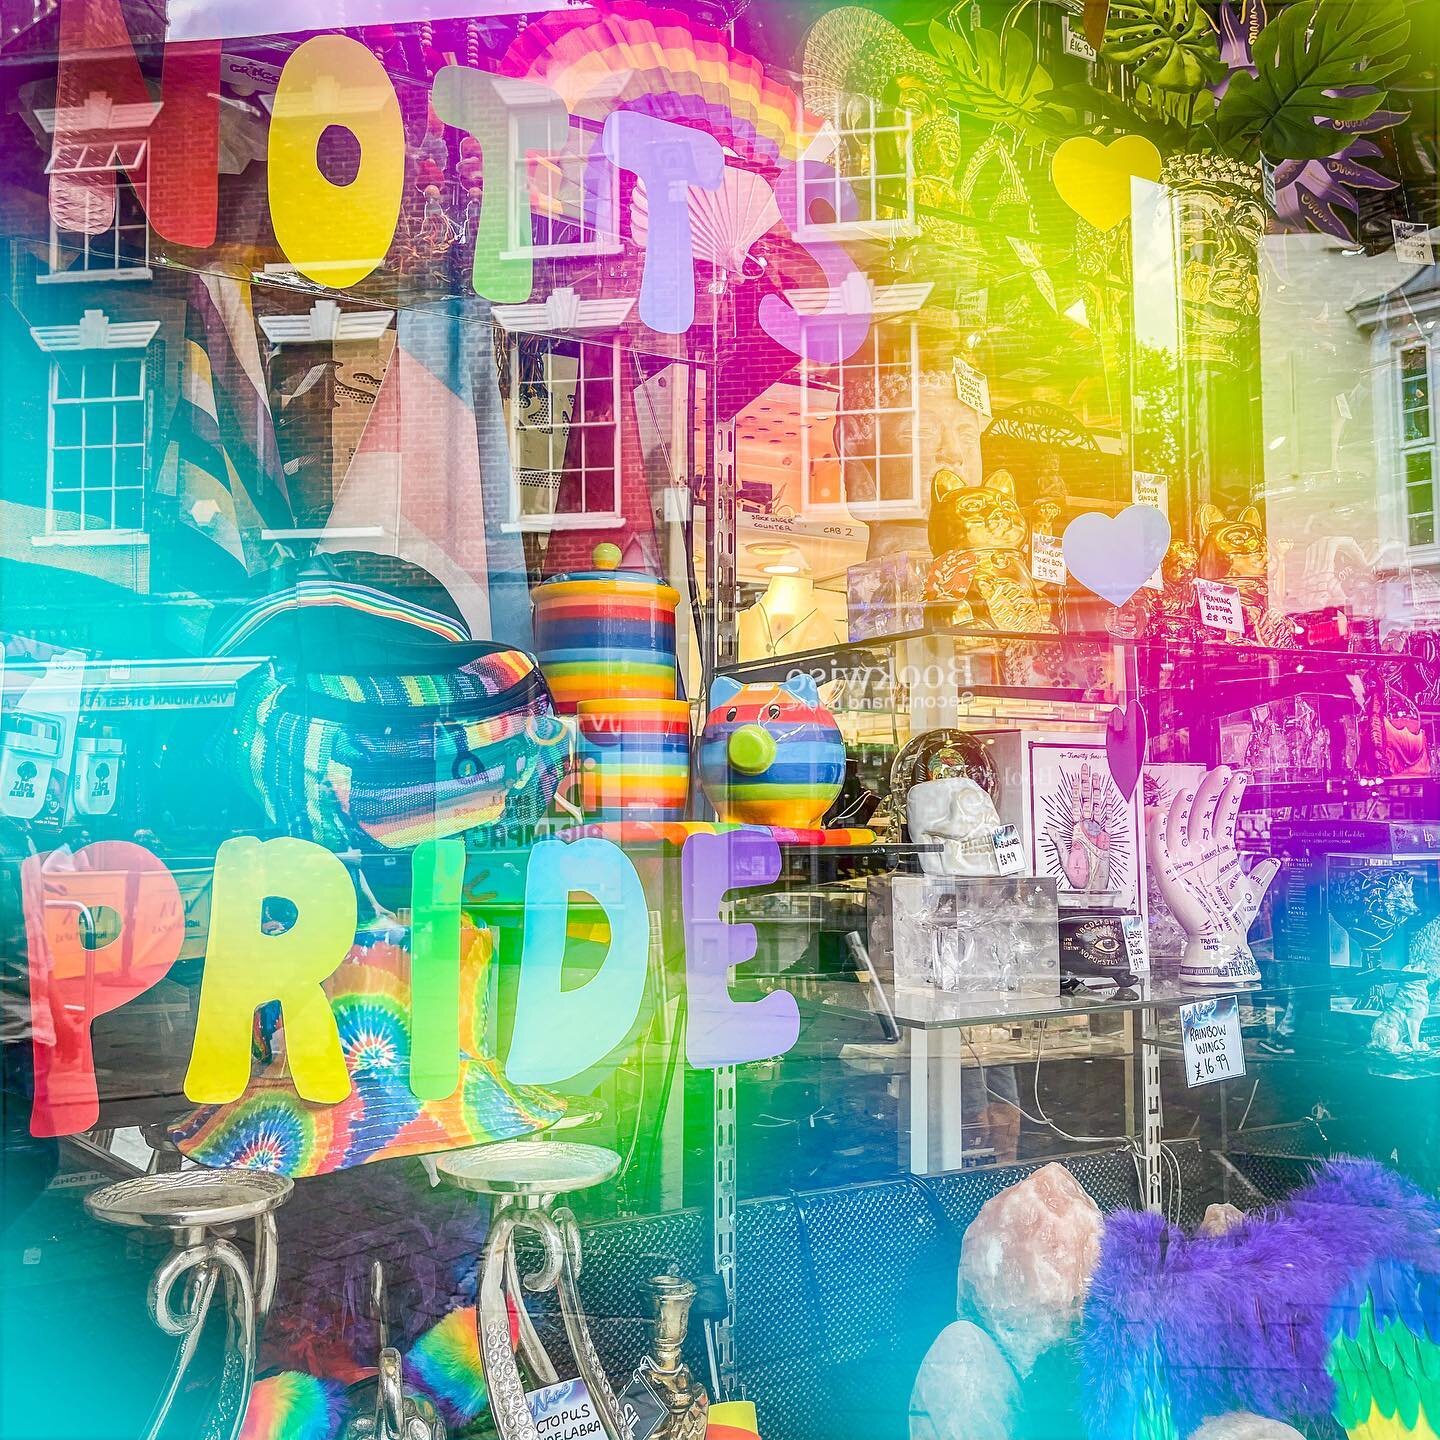 We&rsquo;re ready for Nottingham Pride 2022 are you?? #pride #pridemonth #nottinghampride #lgbtq #loveislove #gaypride #icenine #nottingham